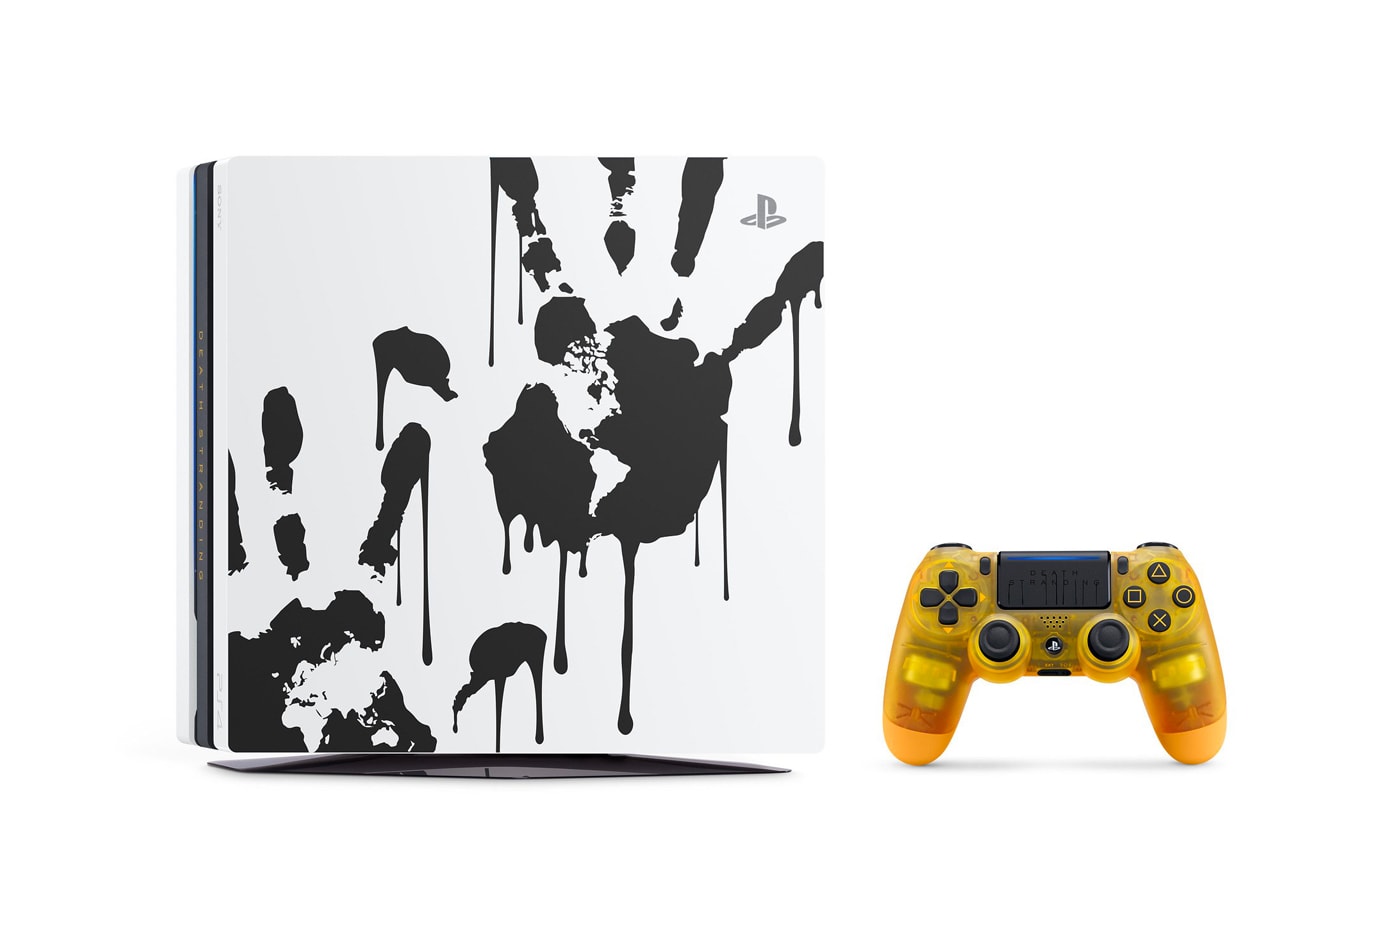 Introducing the Limited Edition Death Stranding PS4 Pro Bundle